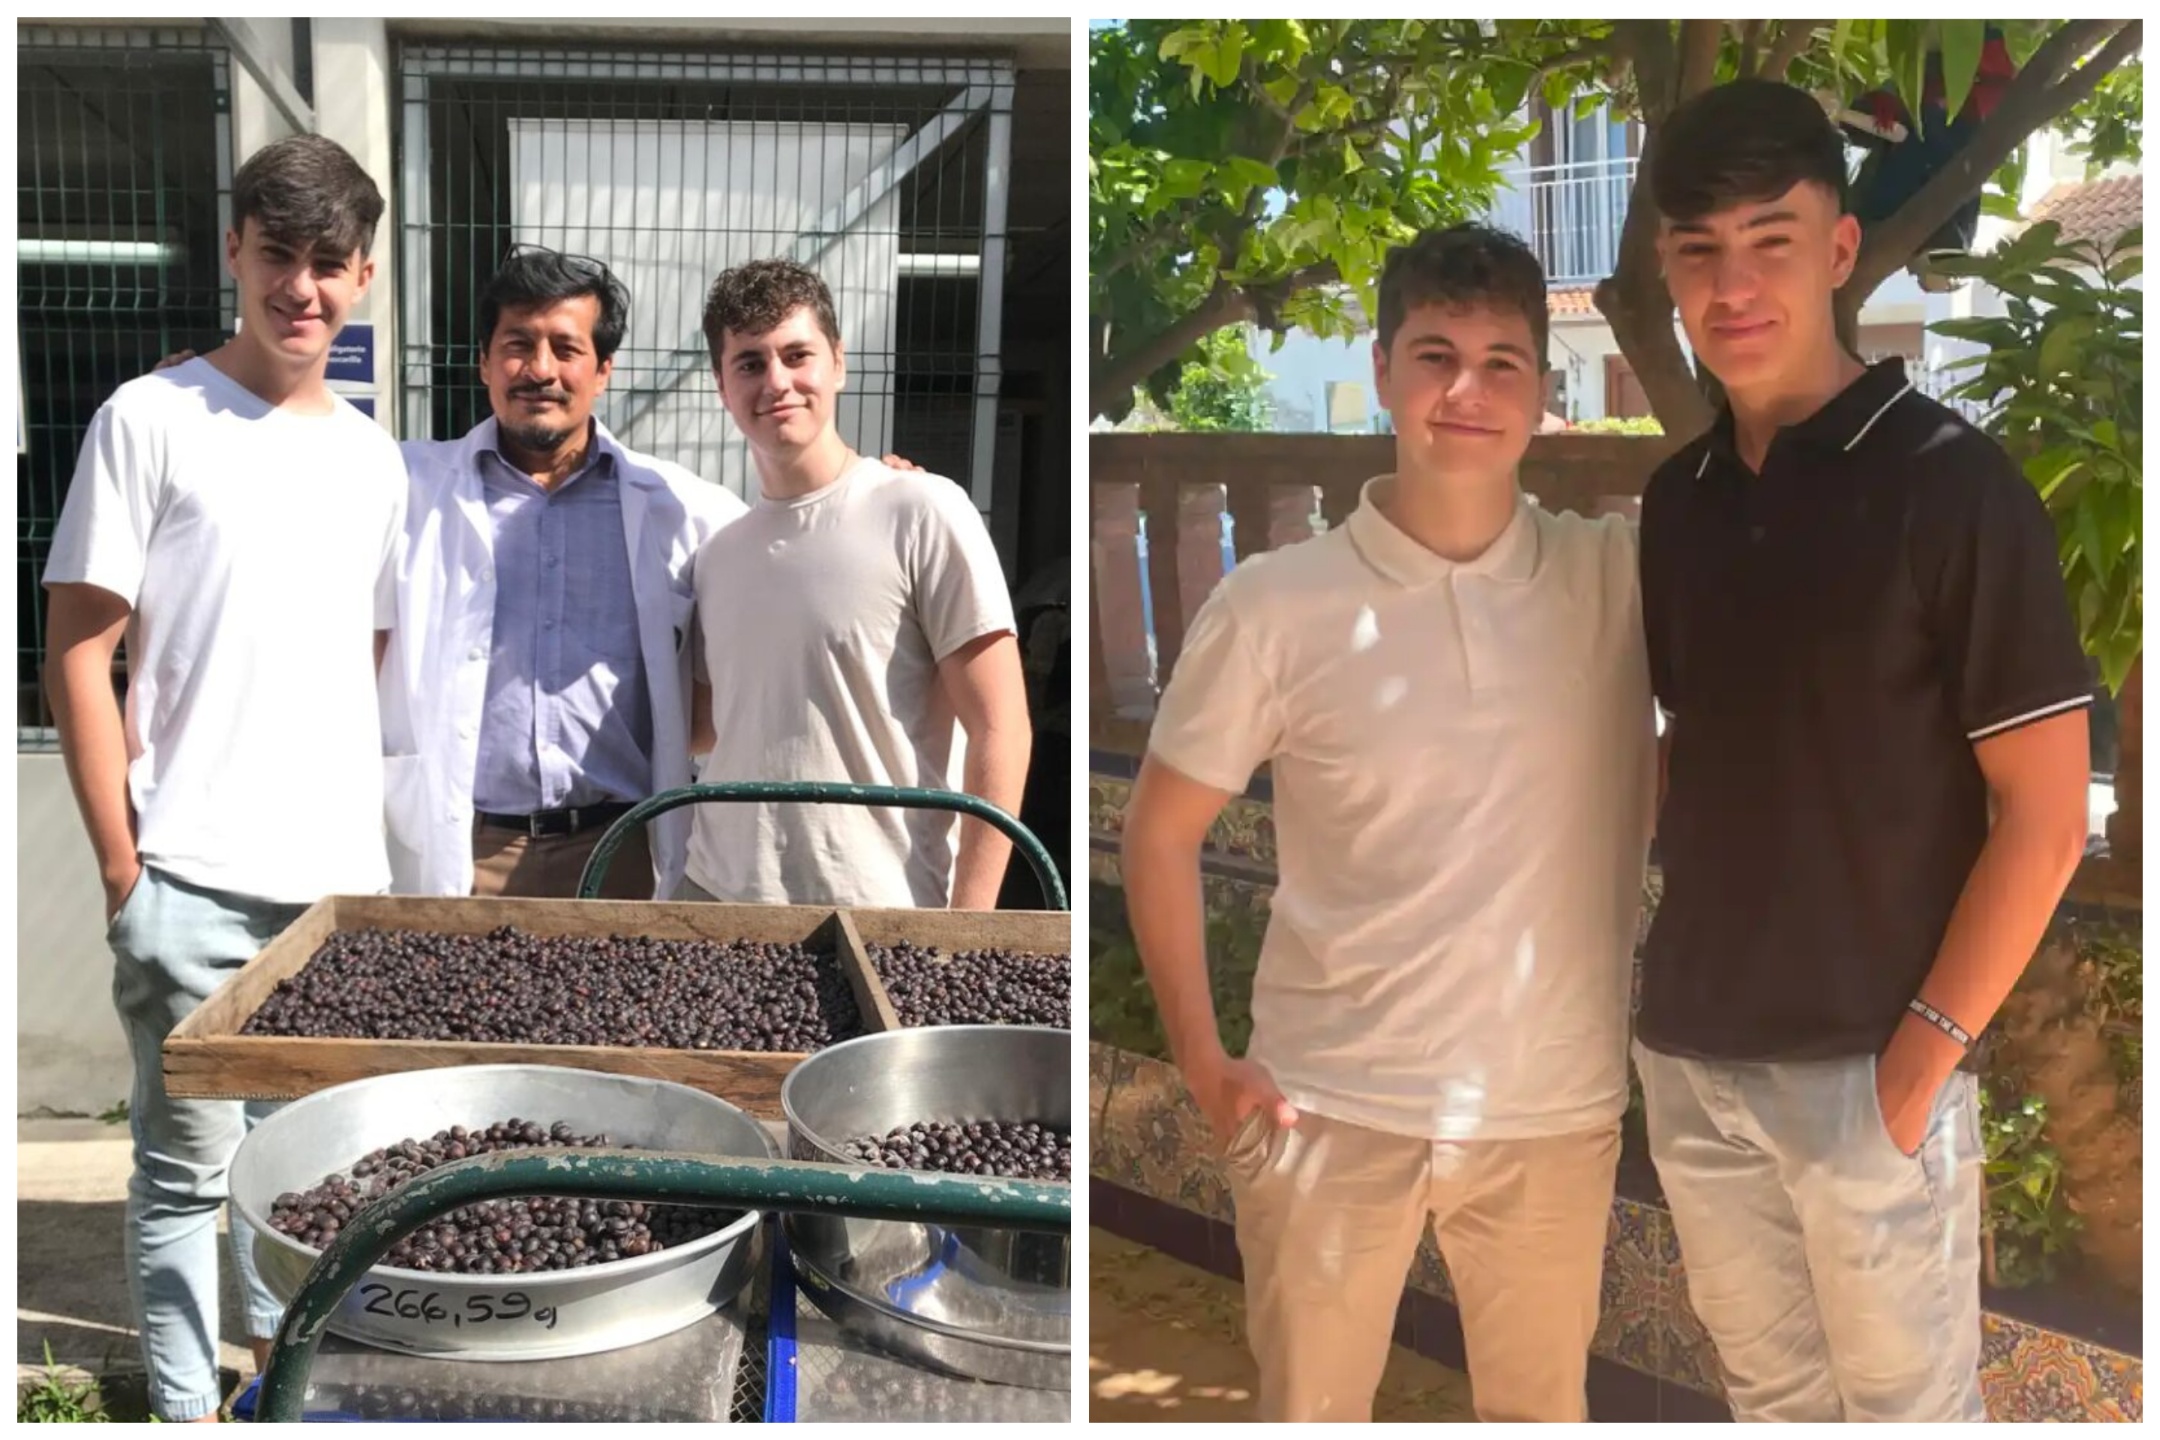 Two teens from Malaga create a vegan, gluten-free and edible cutlery business: Six cafes have already stocked their vanilla-flavoured coffee stirrers [Video]